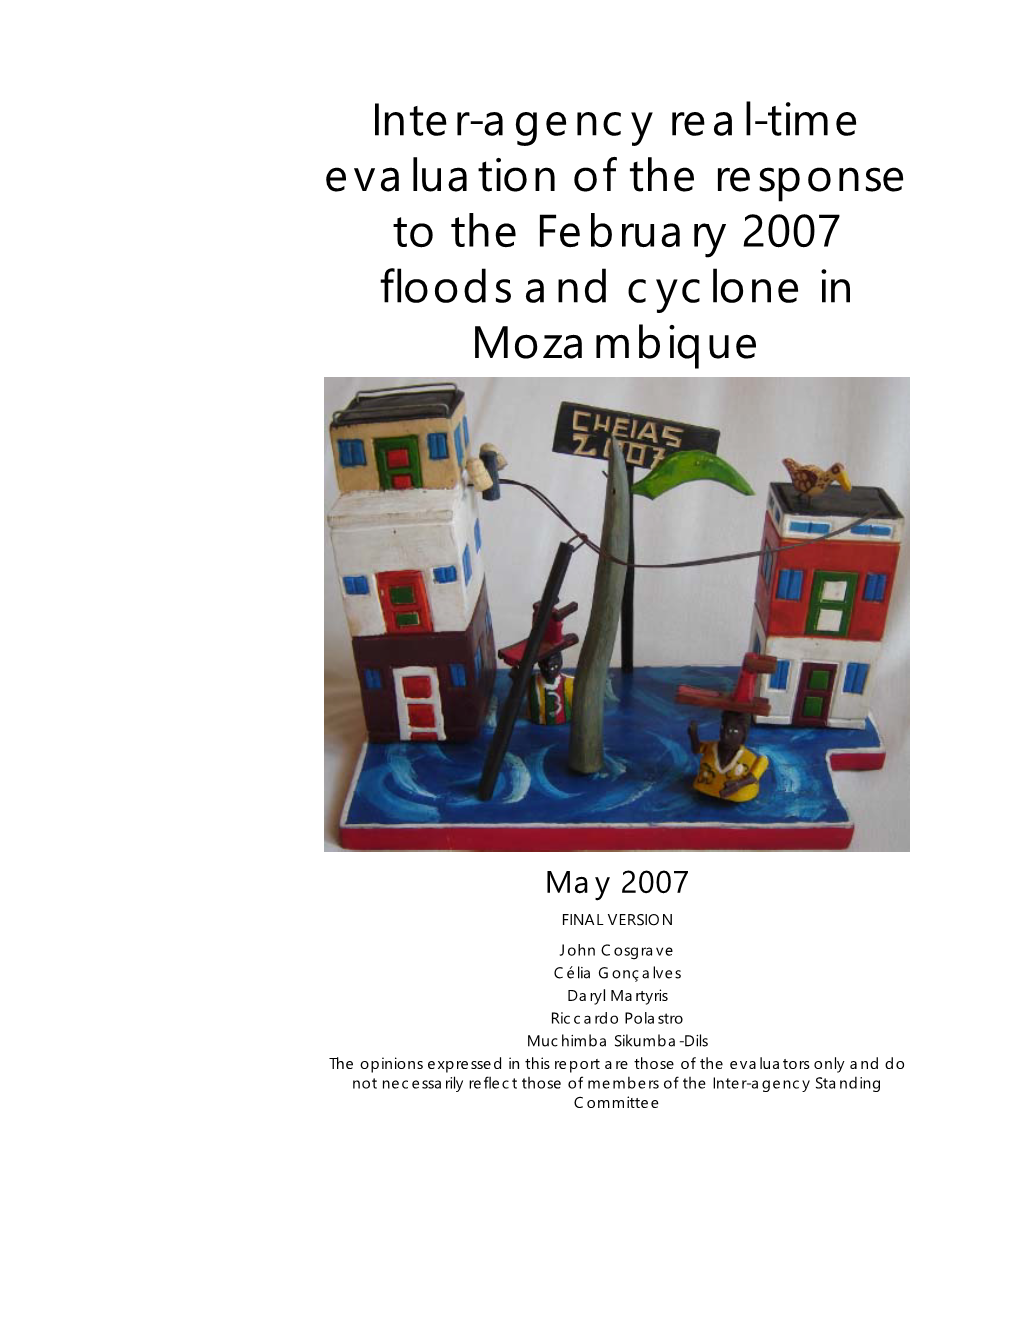 Inter-Agency Real-Time Evaluation of the Response to the February 2007 Floods and Cyclone in Mozambique